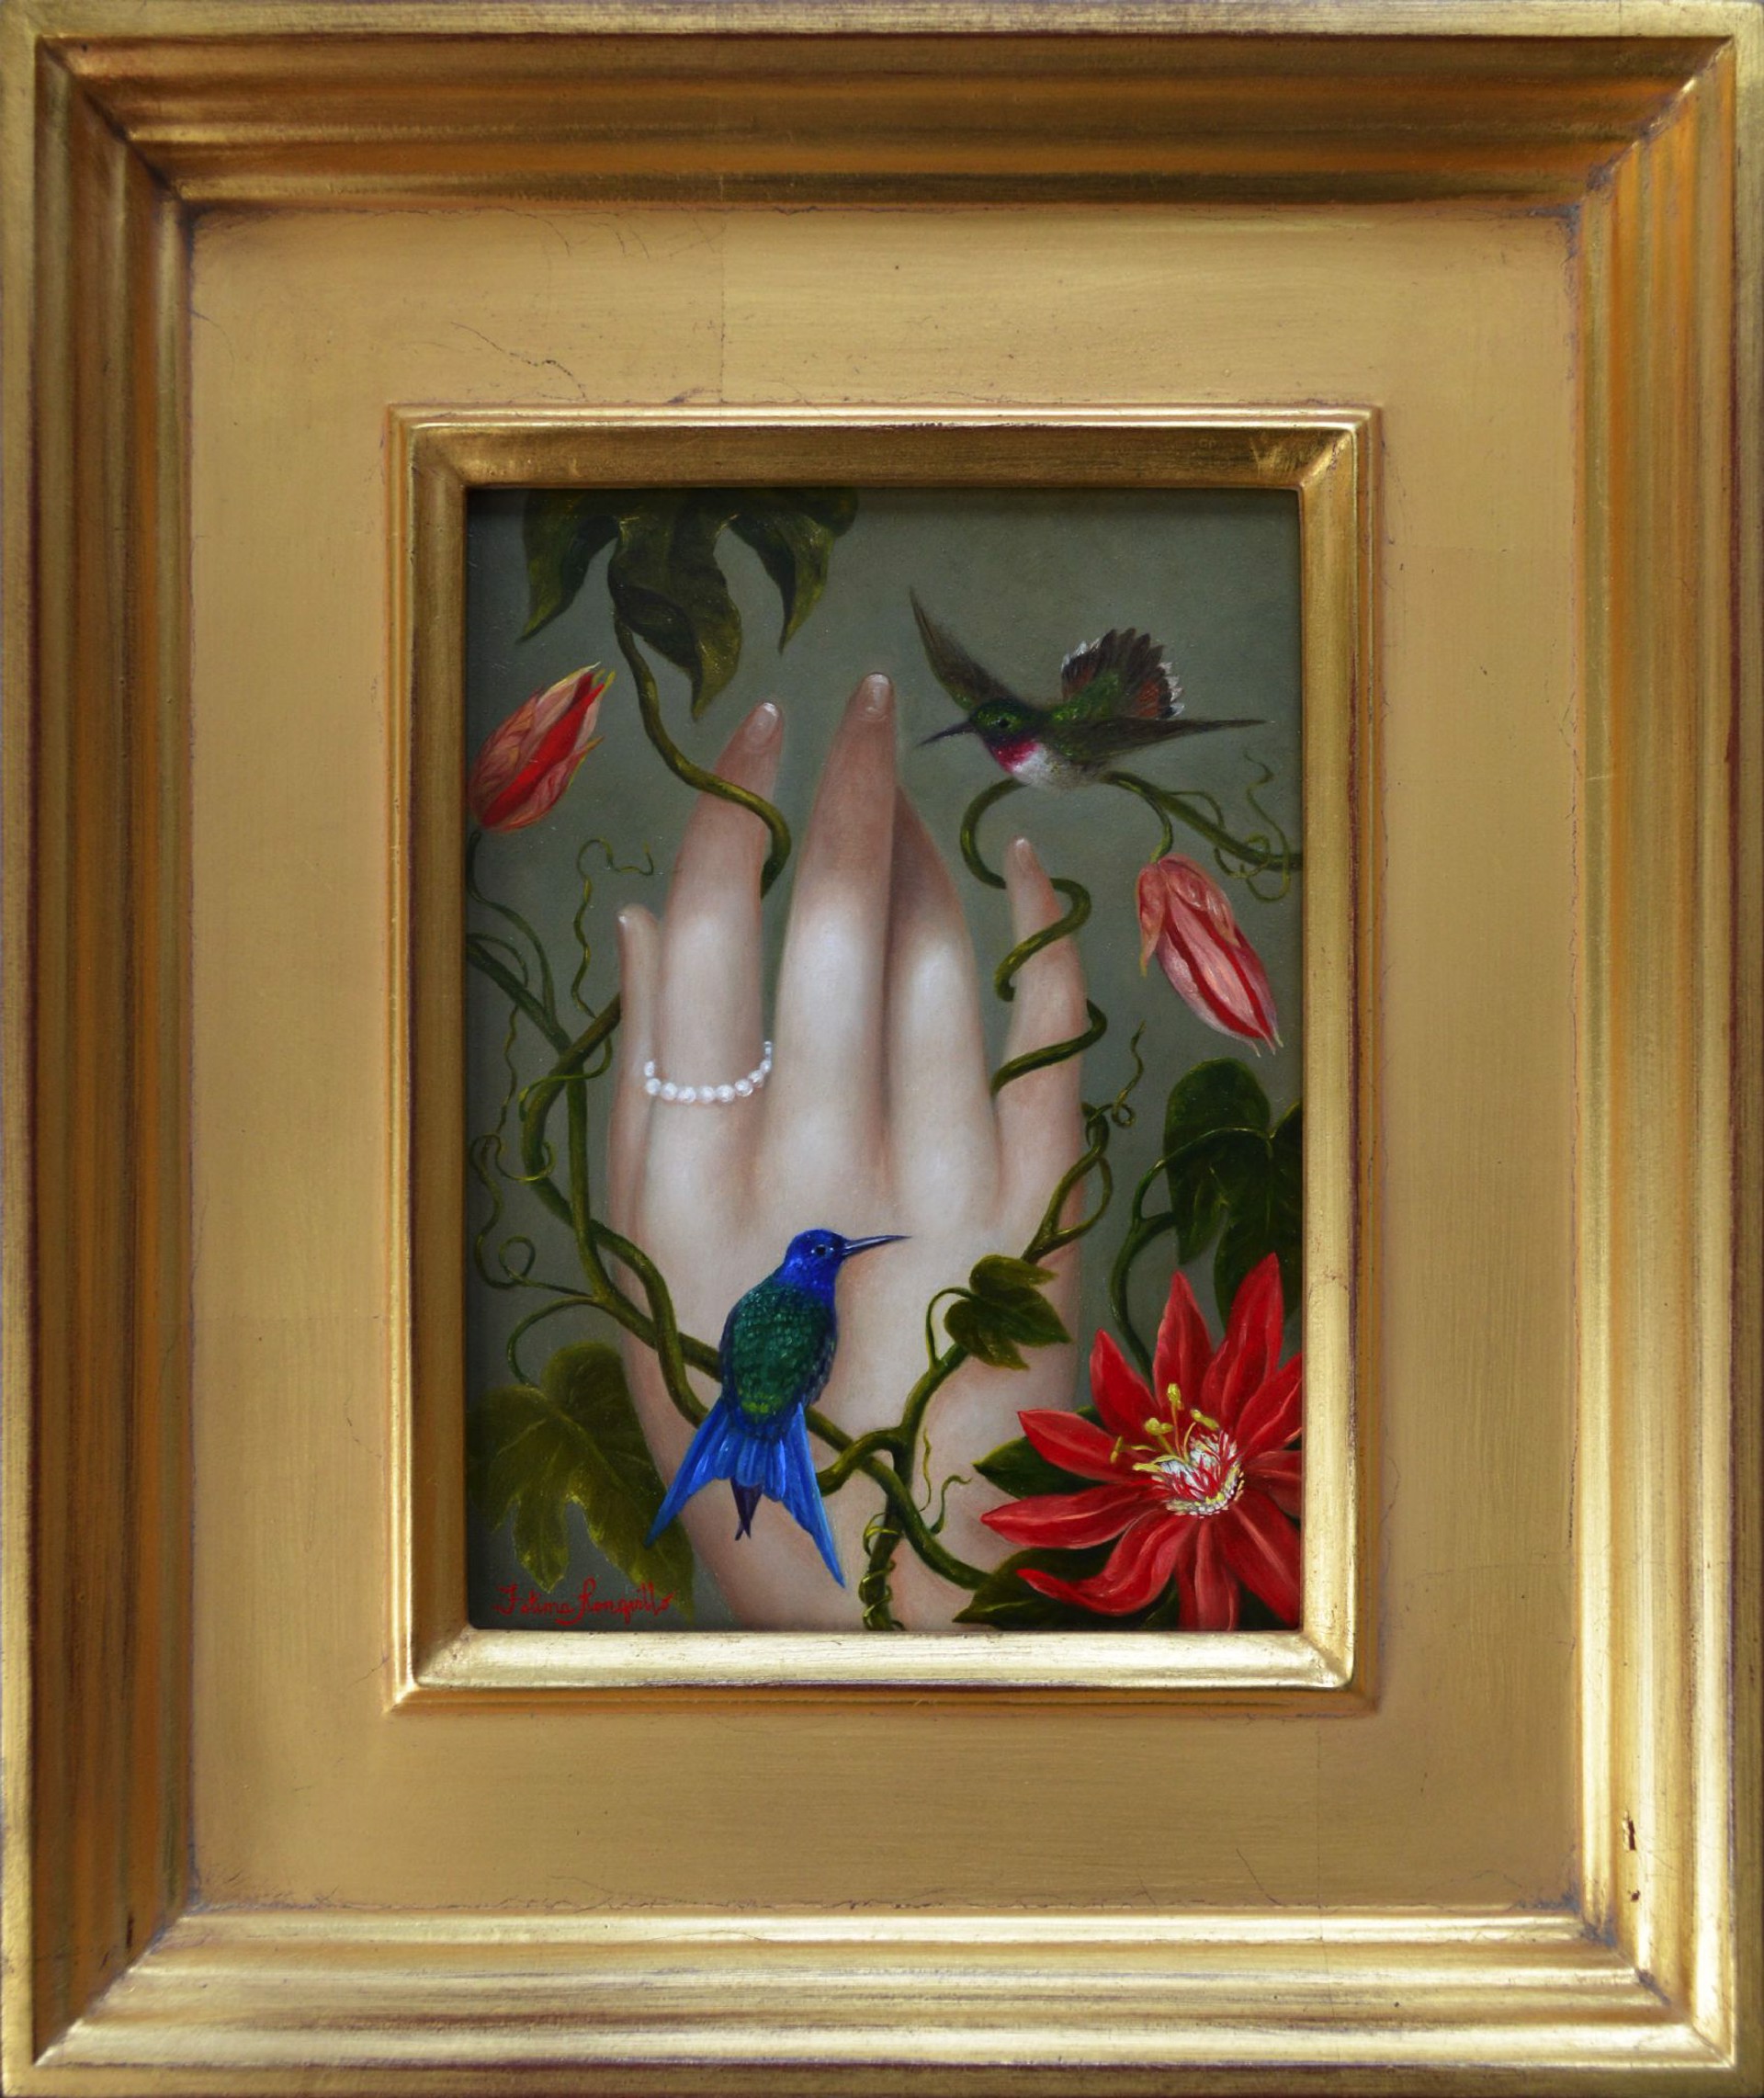 Hand with Ode to Martin Johnson Heade by Fatima Ronquillo